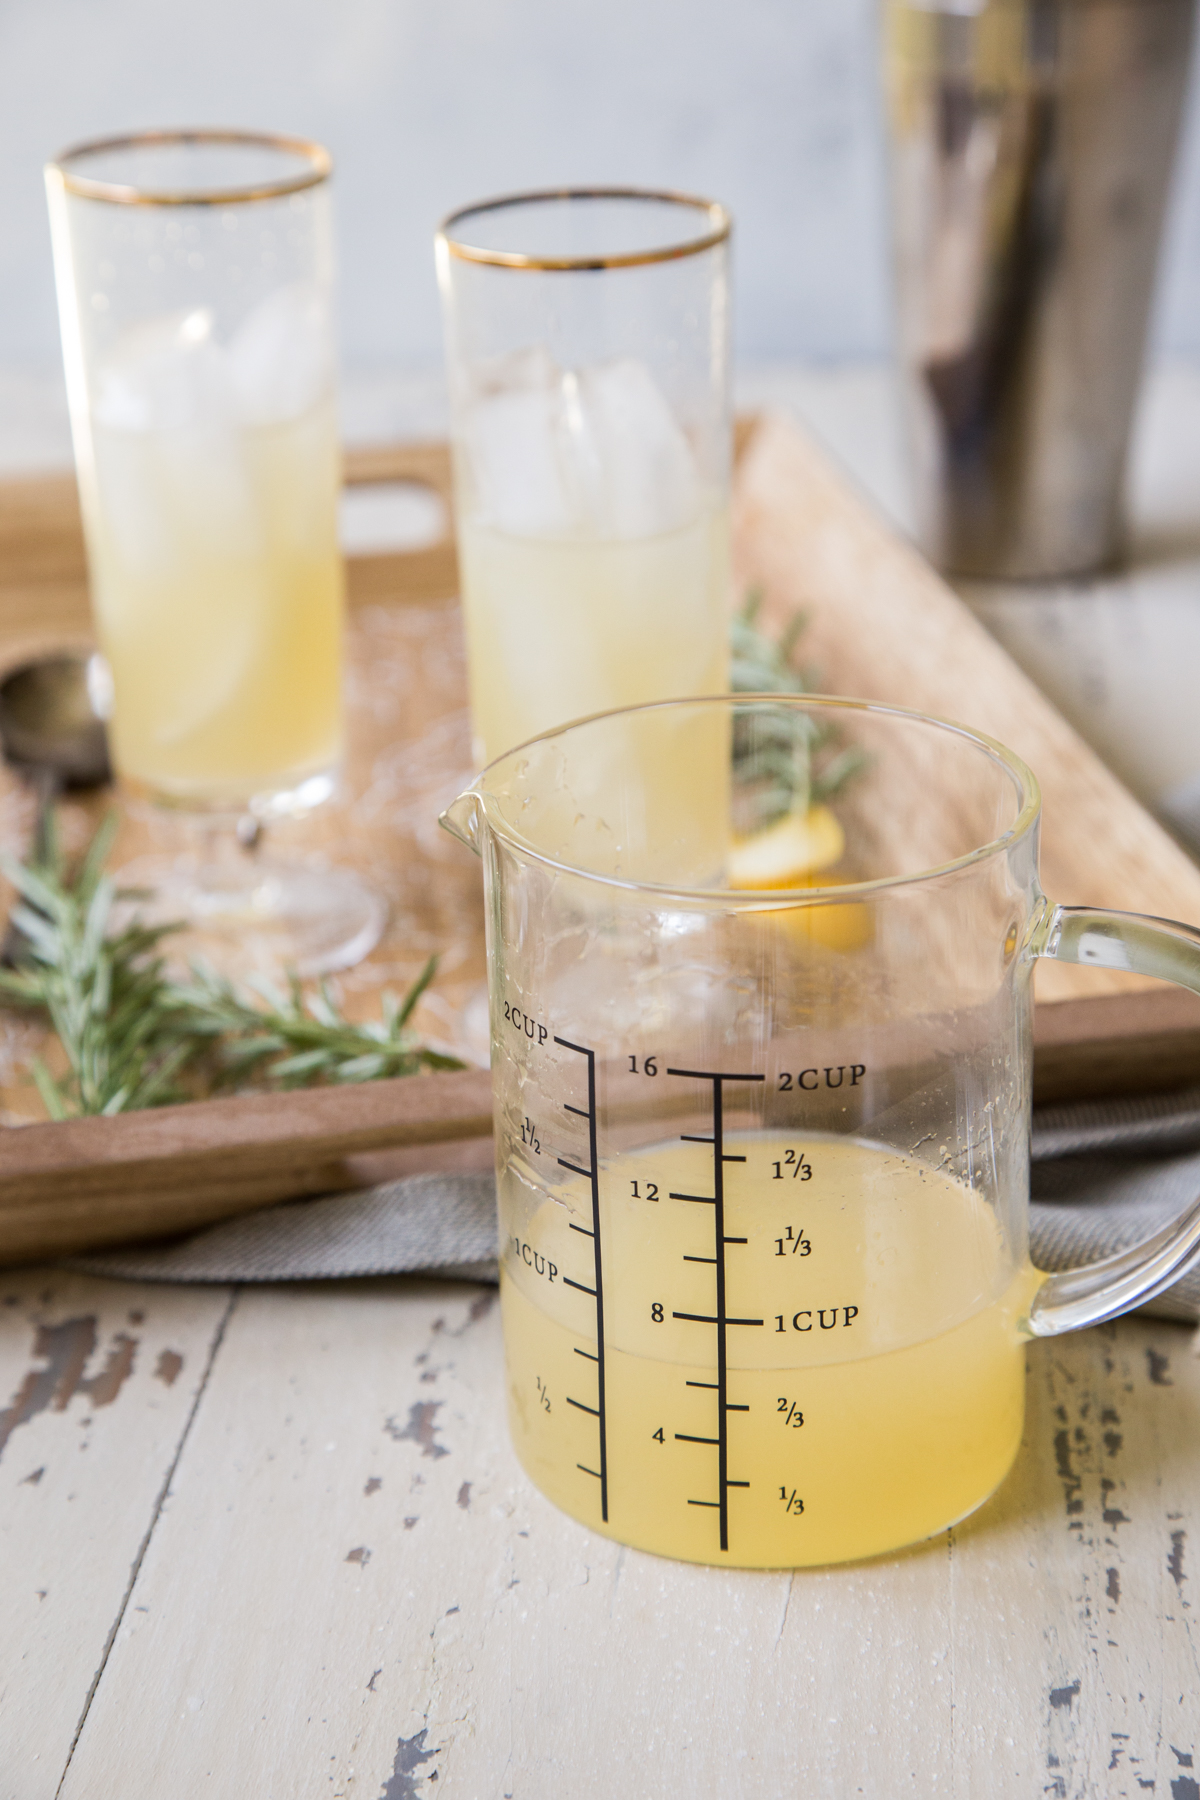 Homemade Rosemary Lemonade Spritzer Cocktail with measuring cup